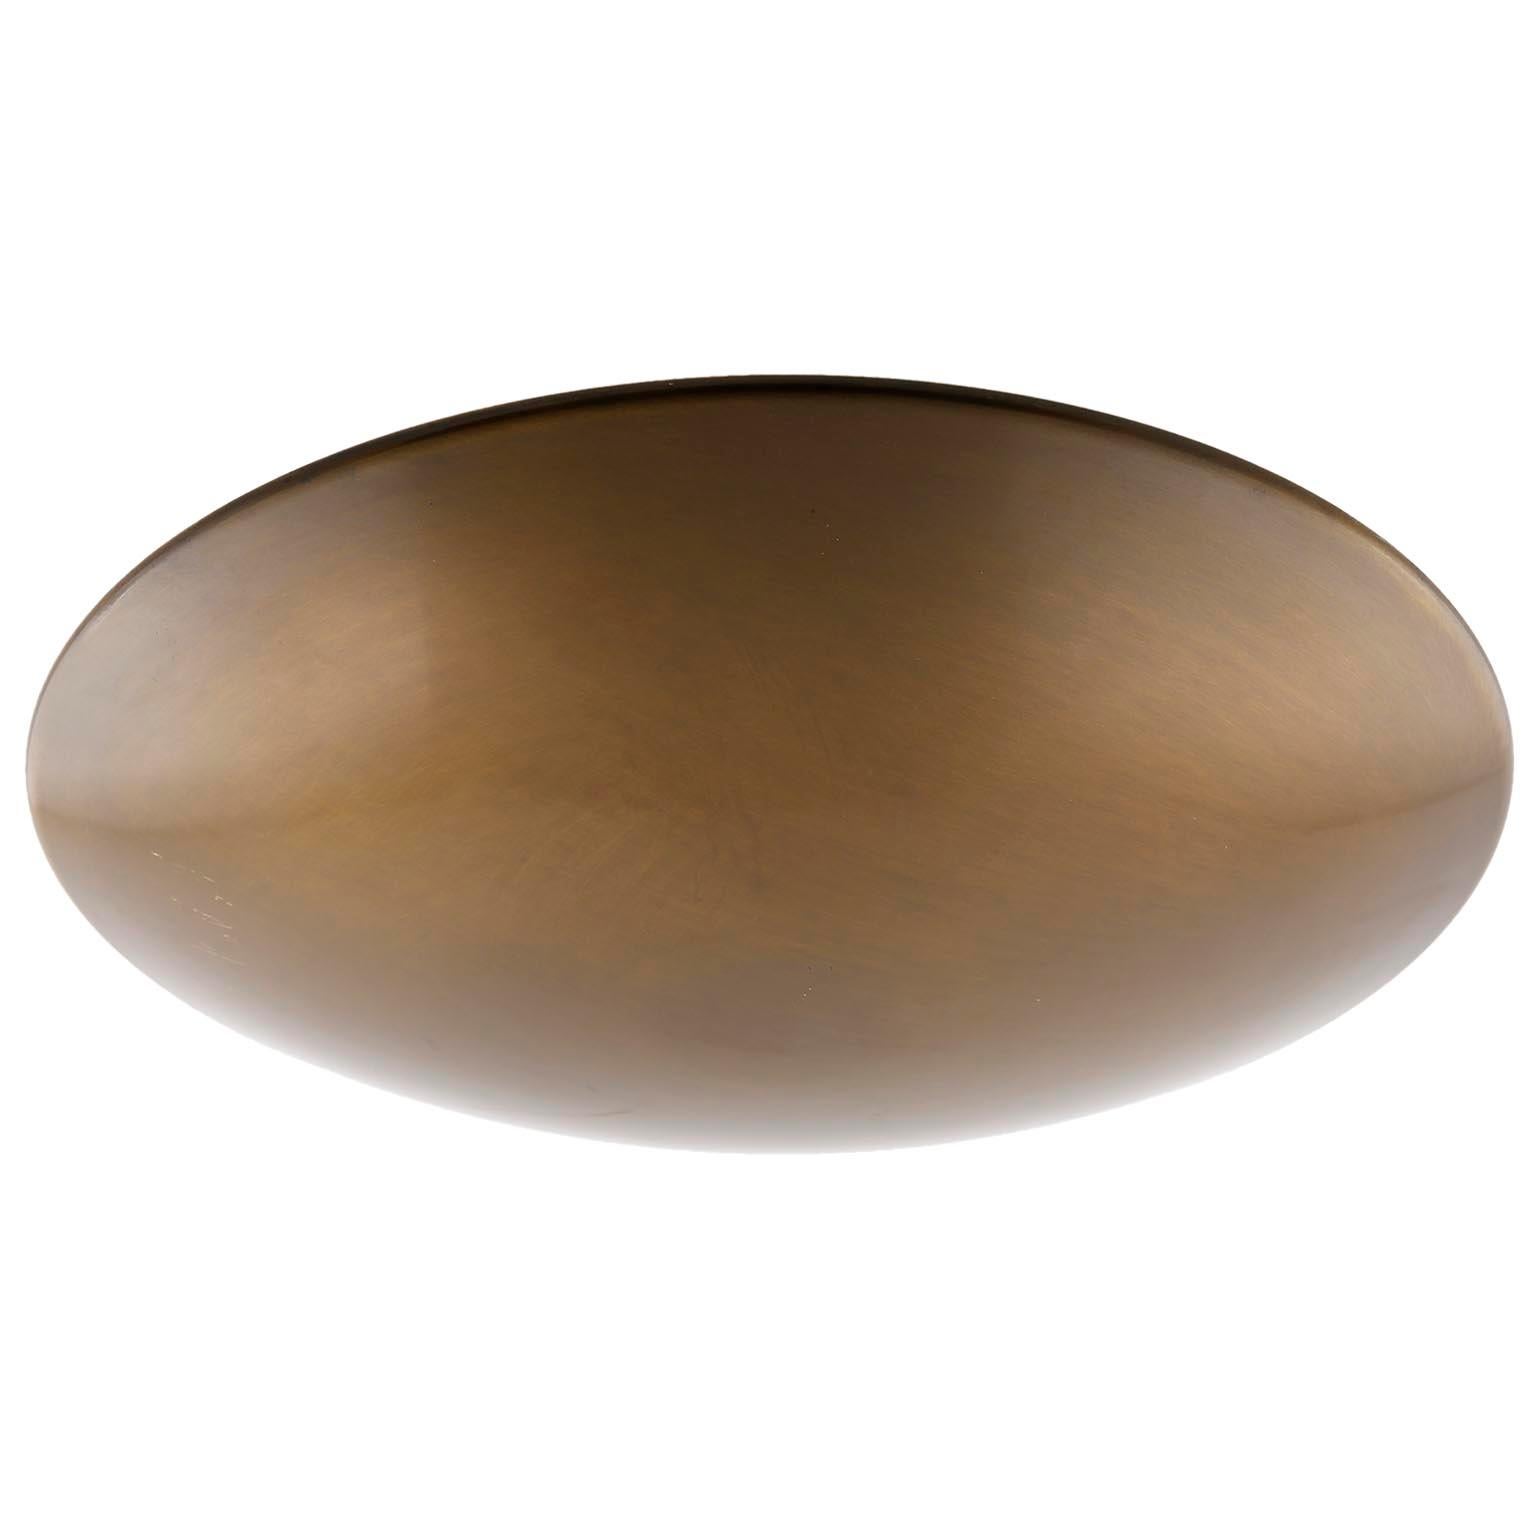 An uplight bowl ceiling light fixture by Florian Schulz, Germany, manufactured in midcentury, circa 1970 (late 1960s or early 1970s).
The lamp is made of solid brass with great patina. It takes five small screw base bulbs E14 candelabra.
It is